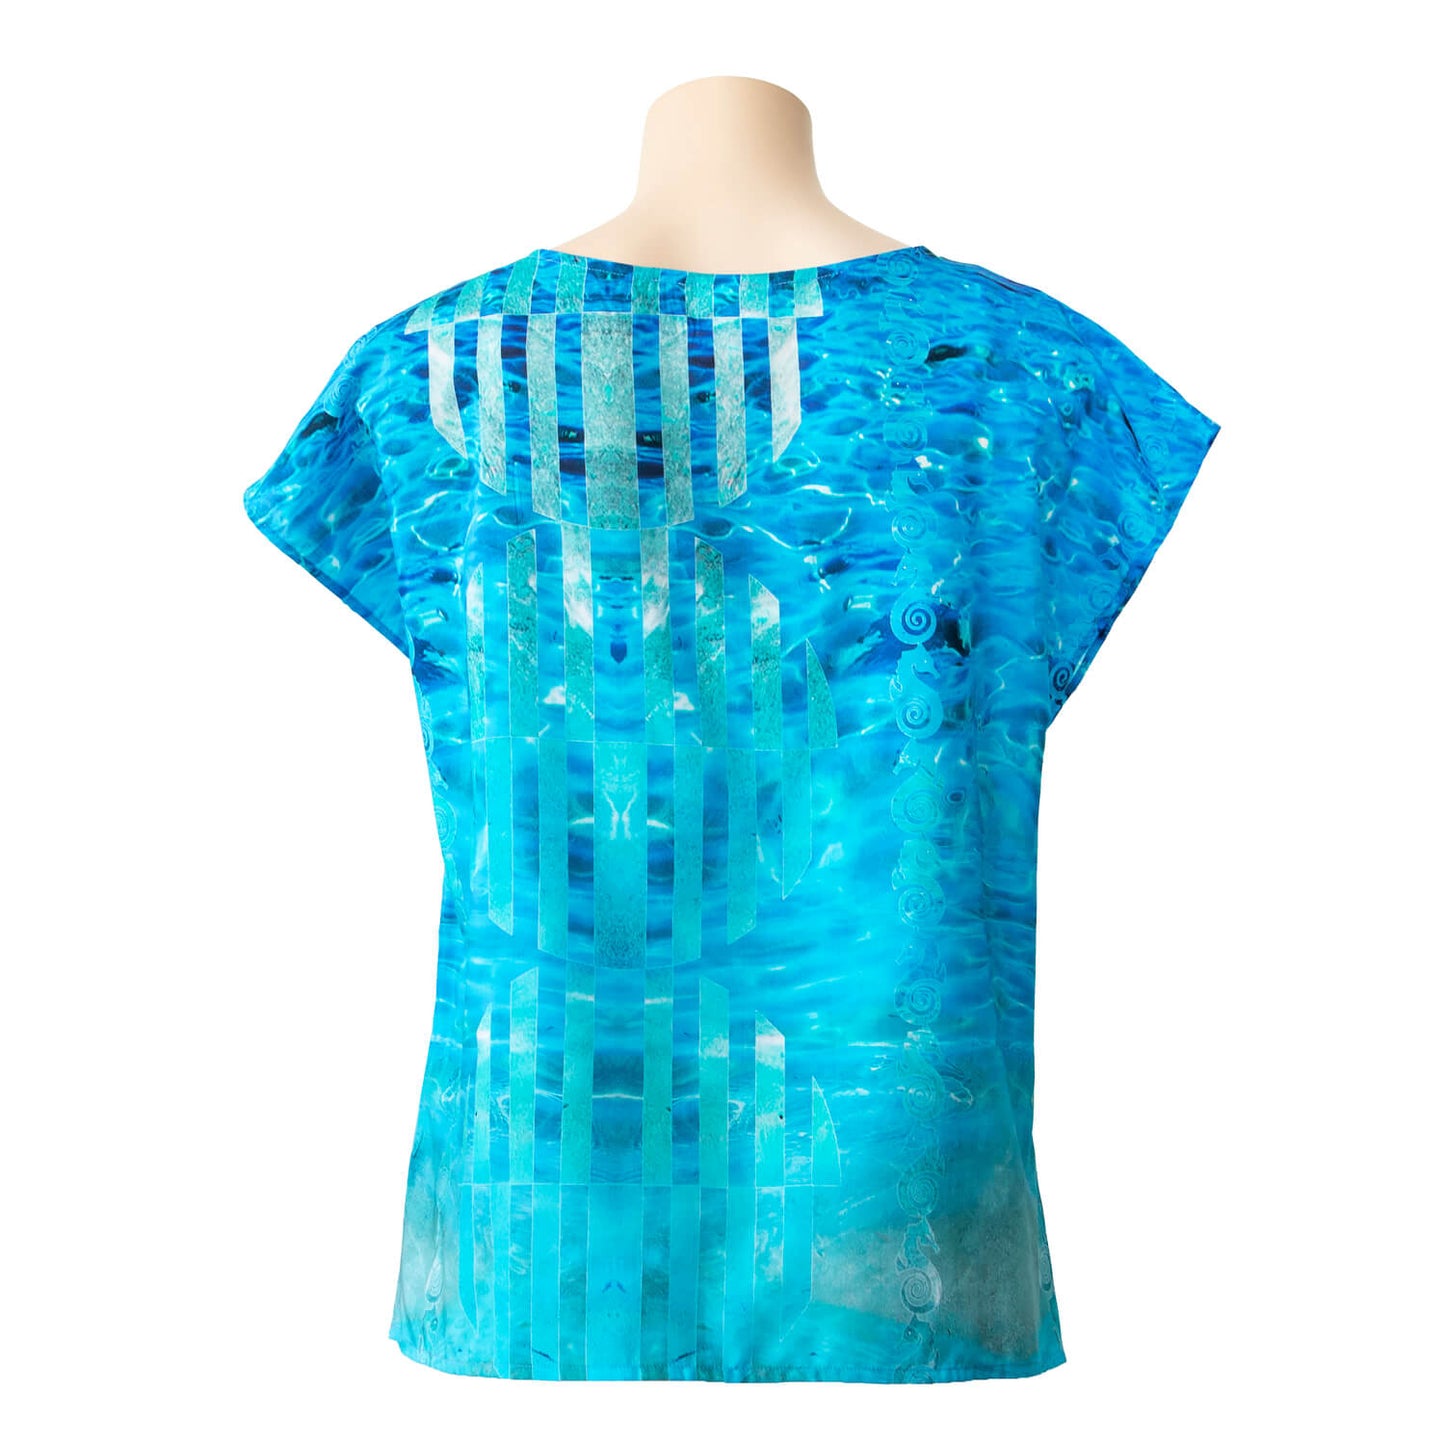 back view of clear blue silk cotton ladies top by seahorse silks